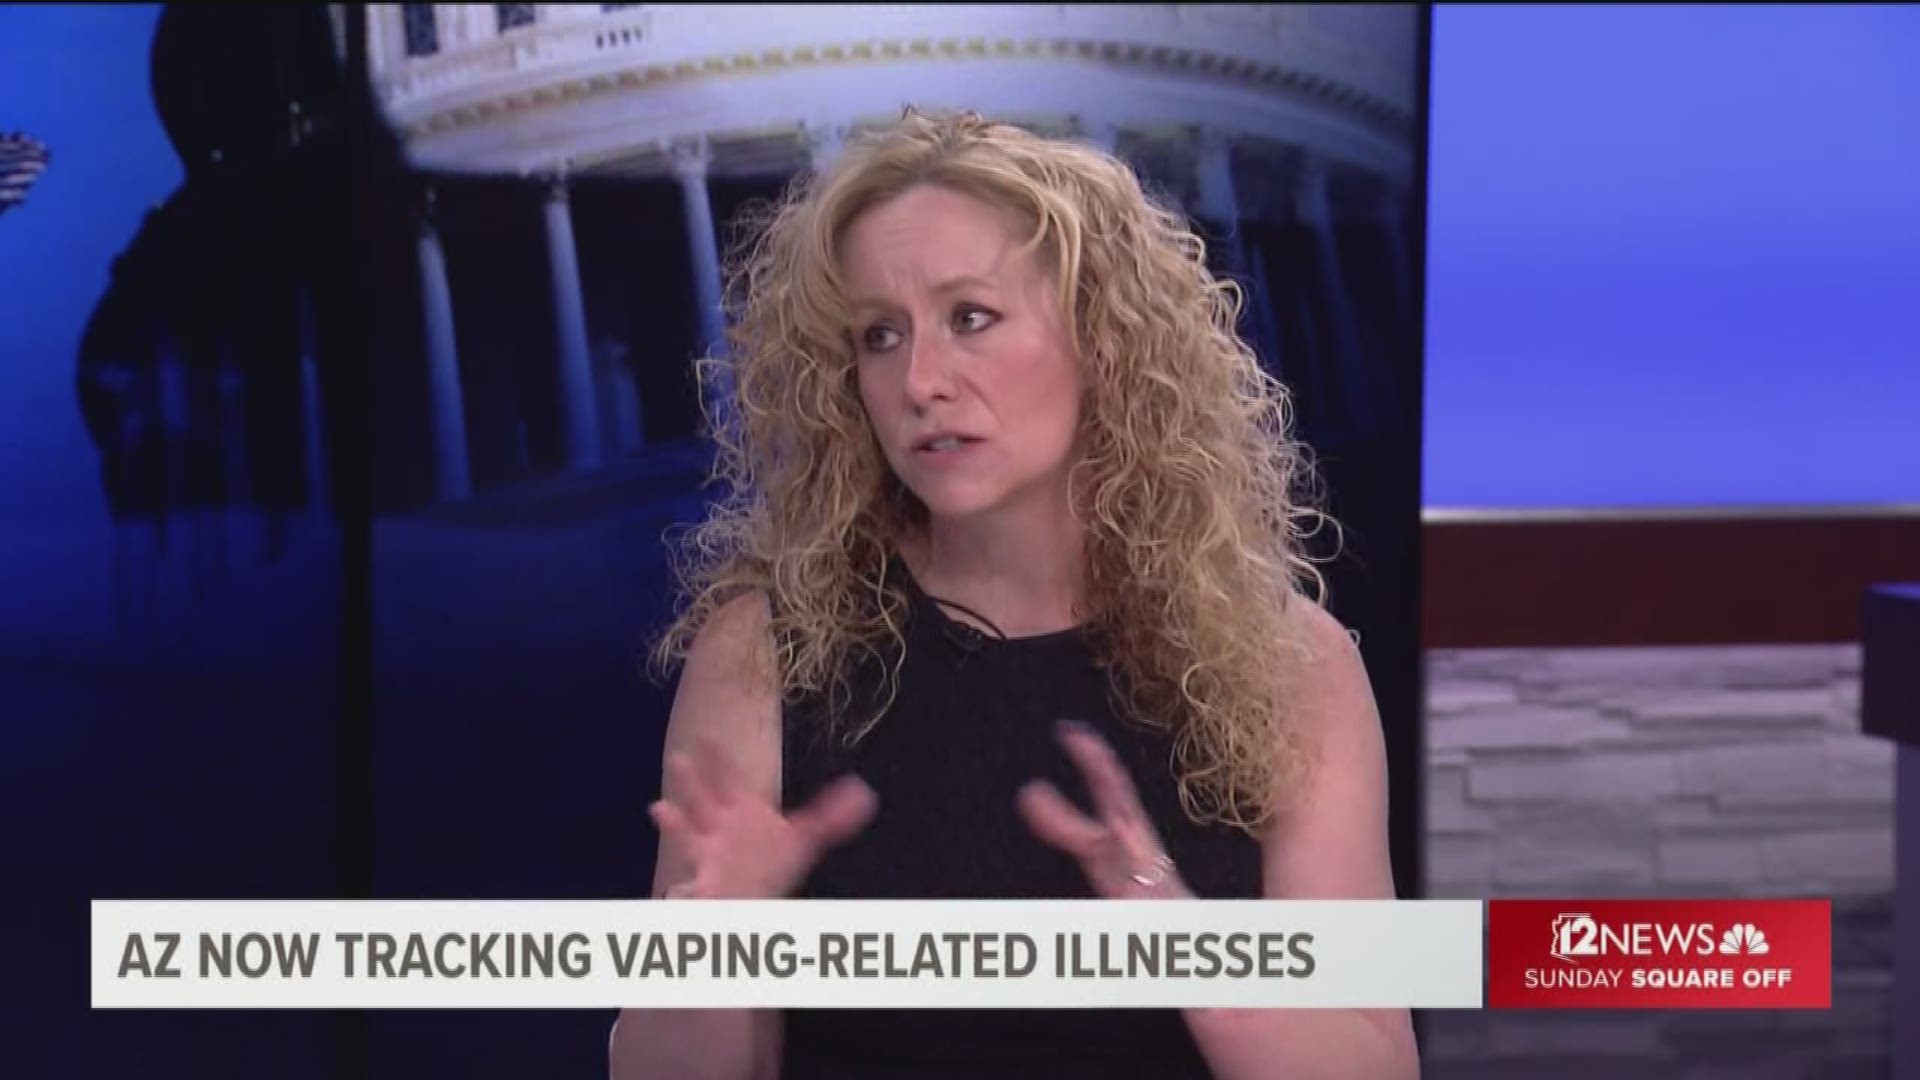 Arizona's health services director says we should see the first confirmed cases of vaping-related illnesses in the state this week, after six deaths nationwide linked to the use of e-cigarette products.